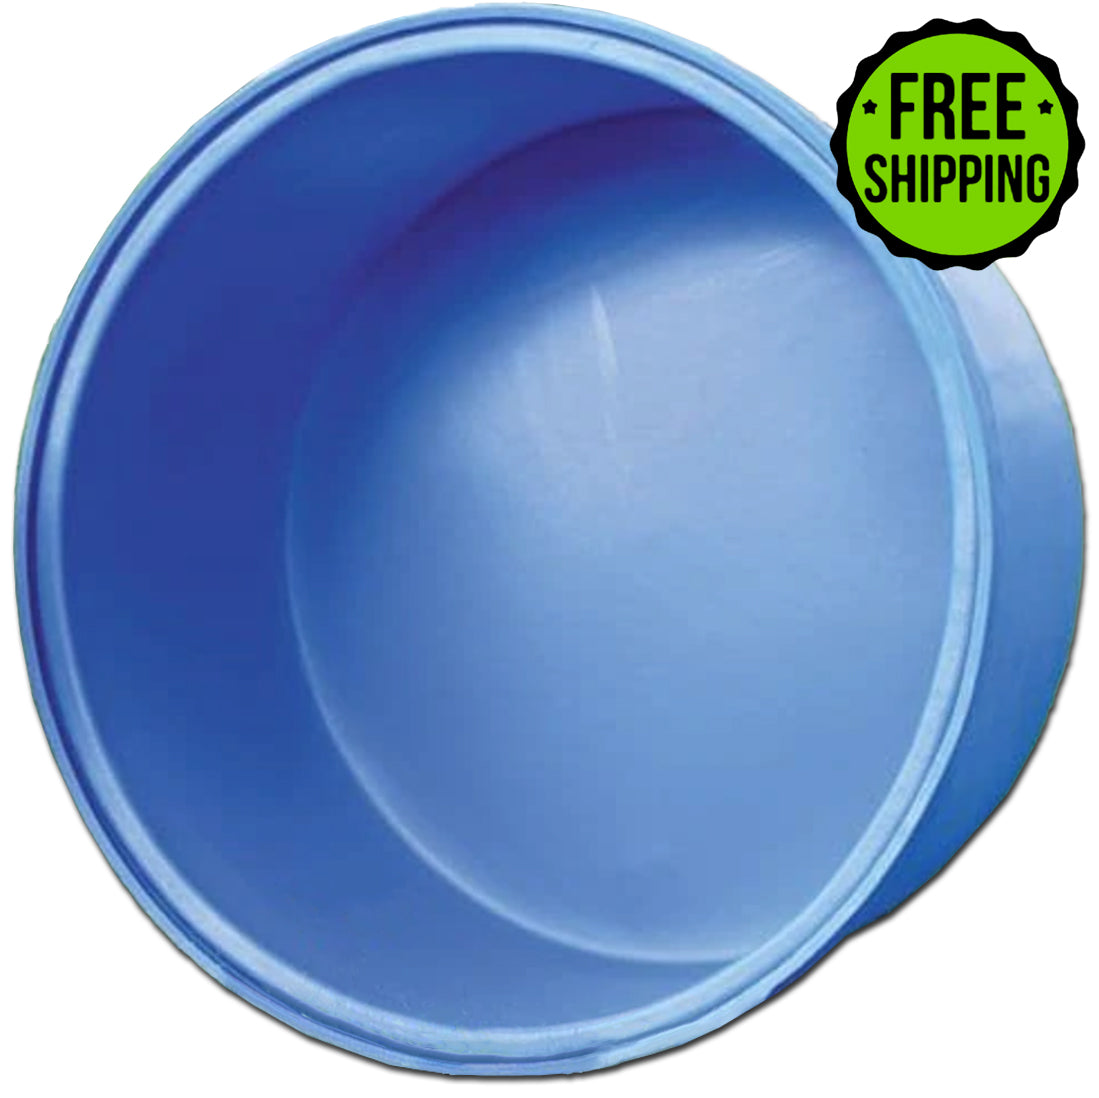 A blue plastic Polyethylene Tank 90 - 250 Gallons with the words "free shipping". This tank can be used for a variety of purposes such as serving food or holding small items. The color of the tank is a vibrant marine.